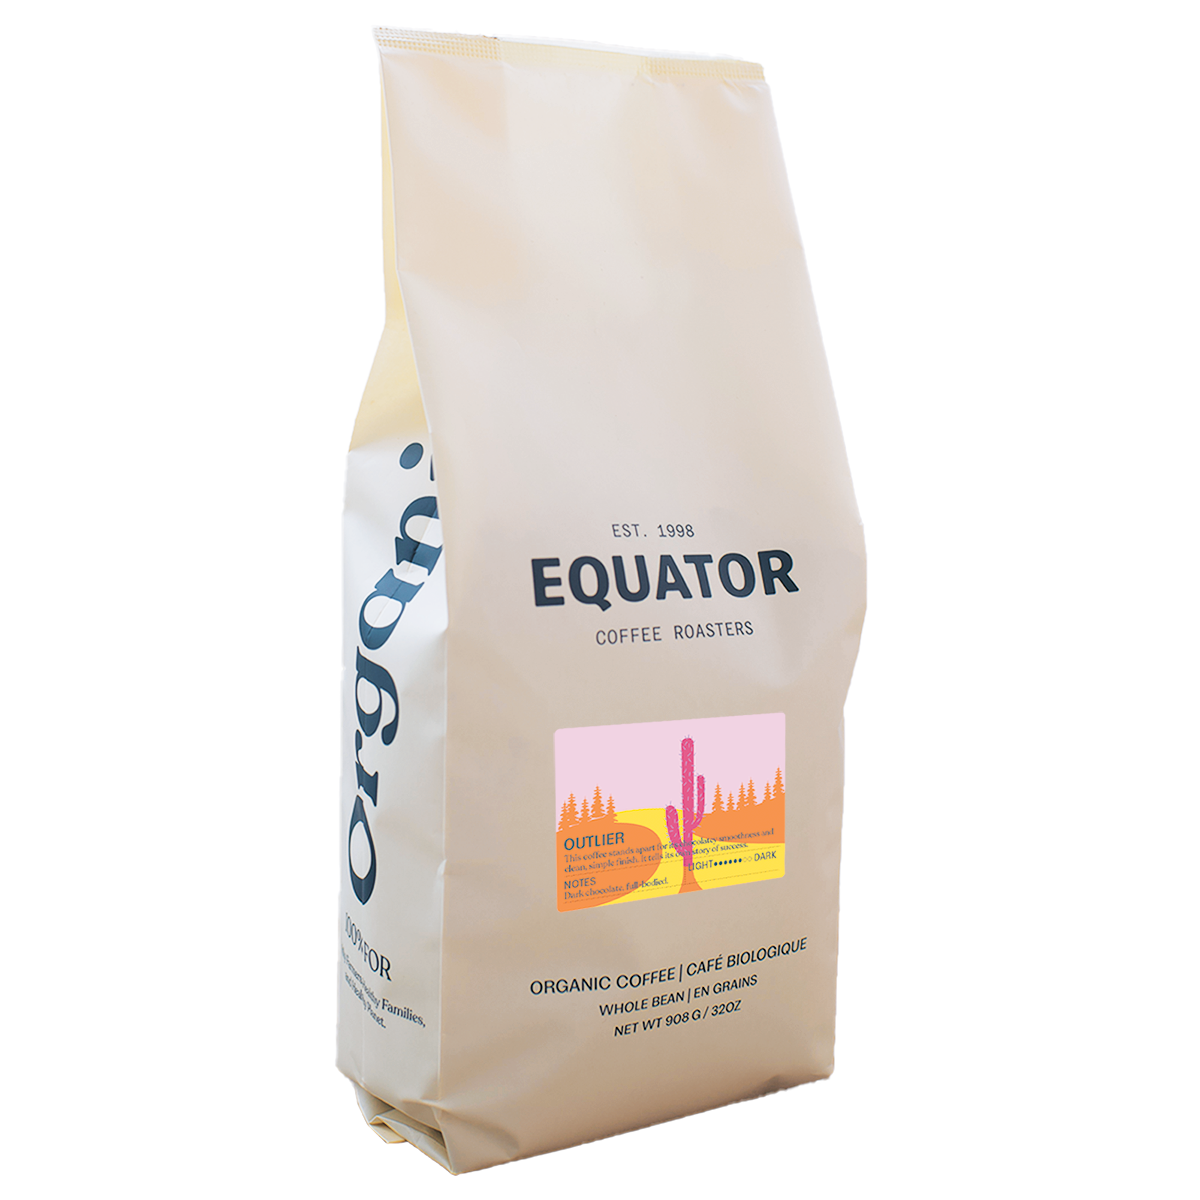 908g or 2lb bag of Outlier dark roasted coffee beans.